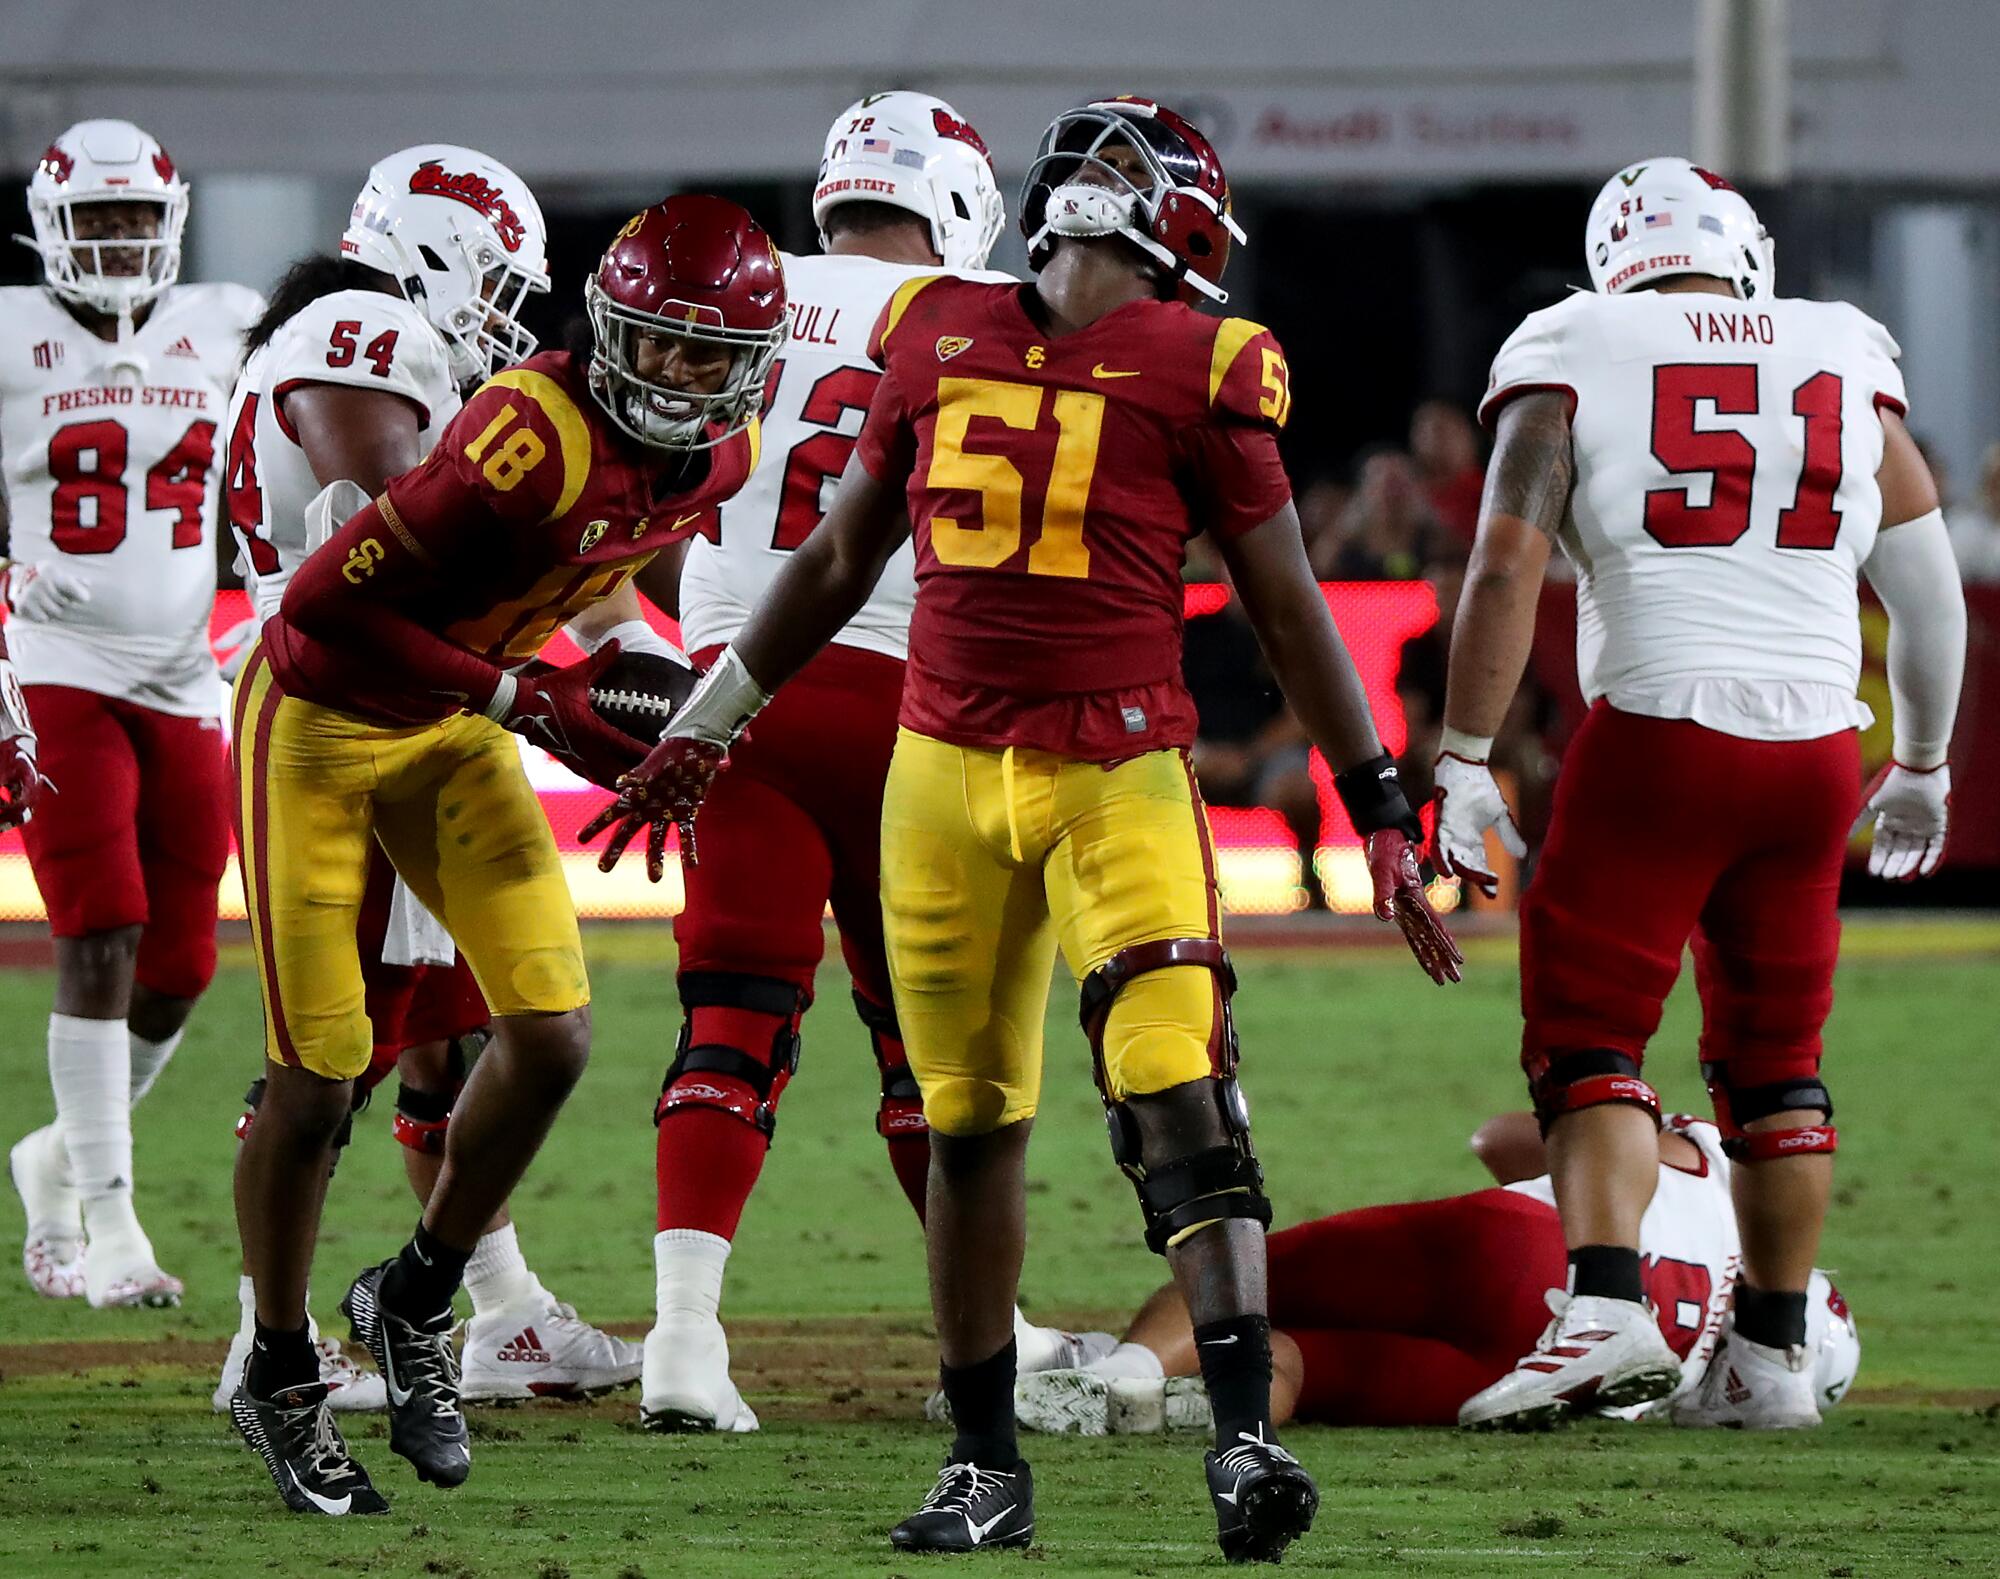 Solomon Byrd celebrates after recovering a fumble against Fresno State last season.